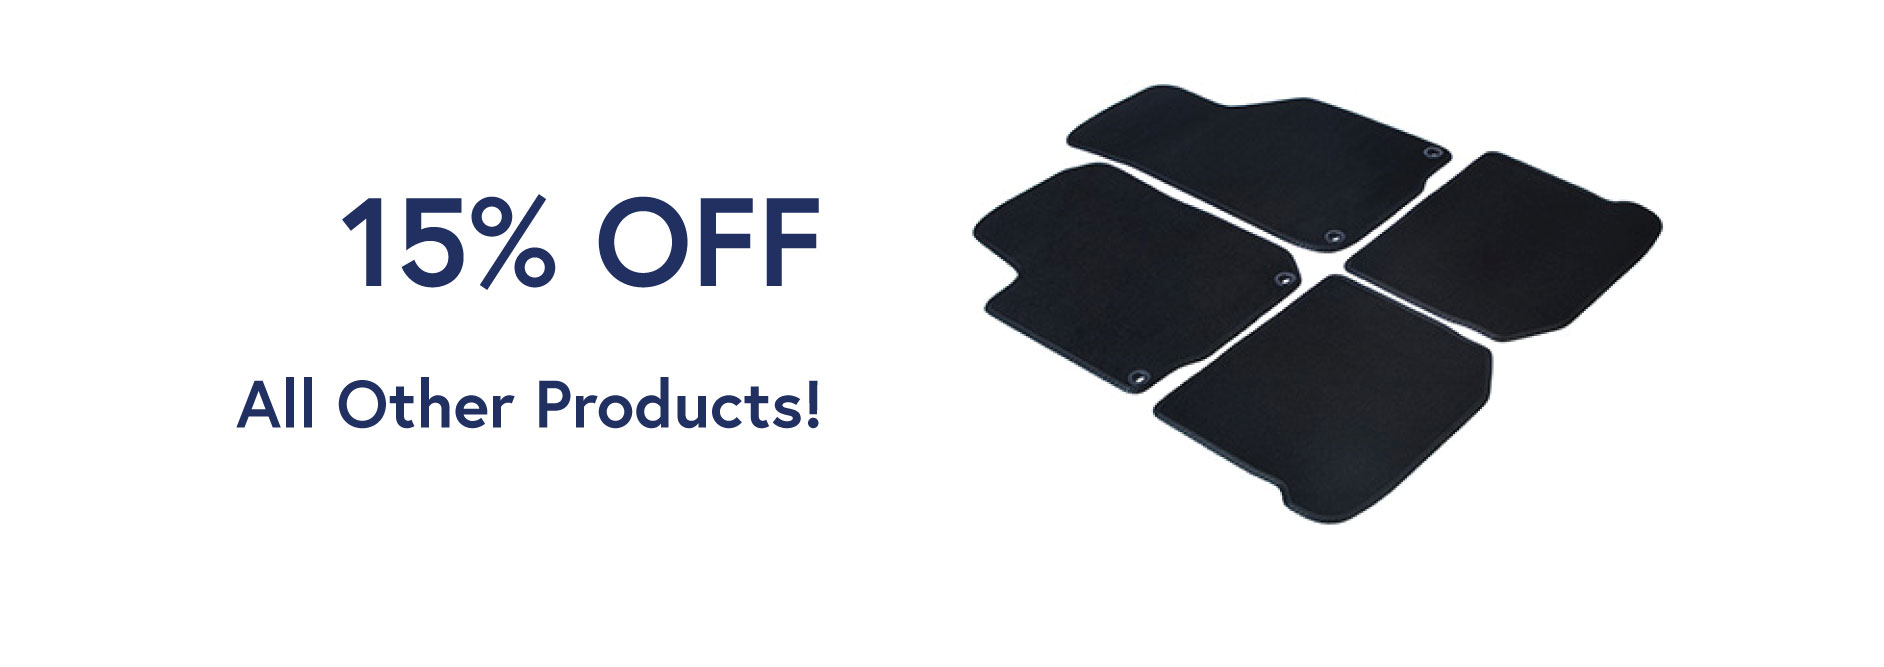 15% Off All Other Products!